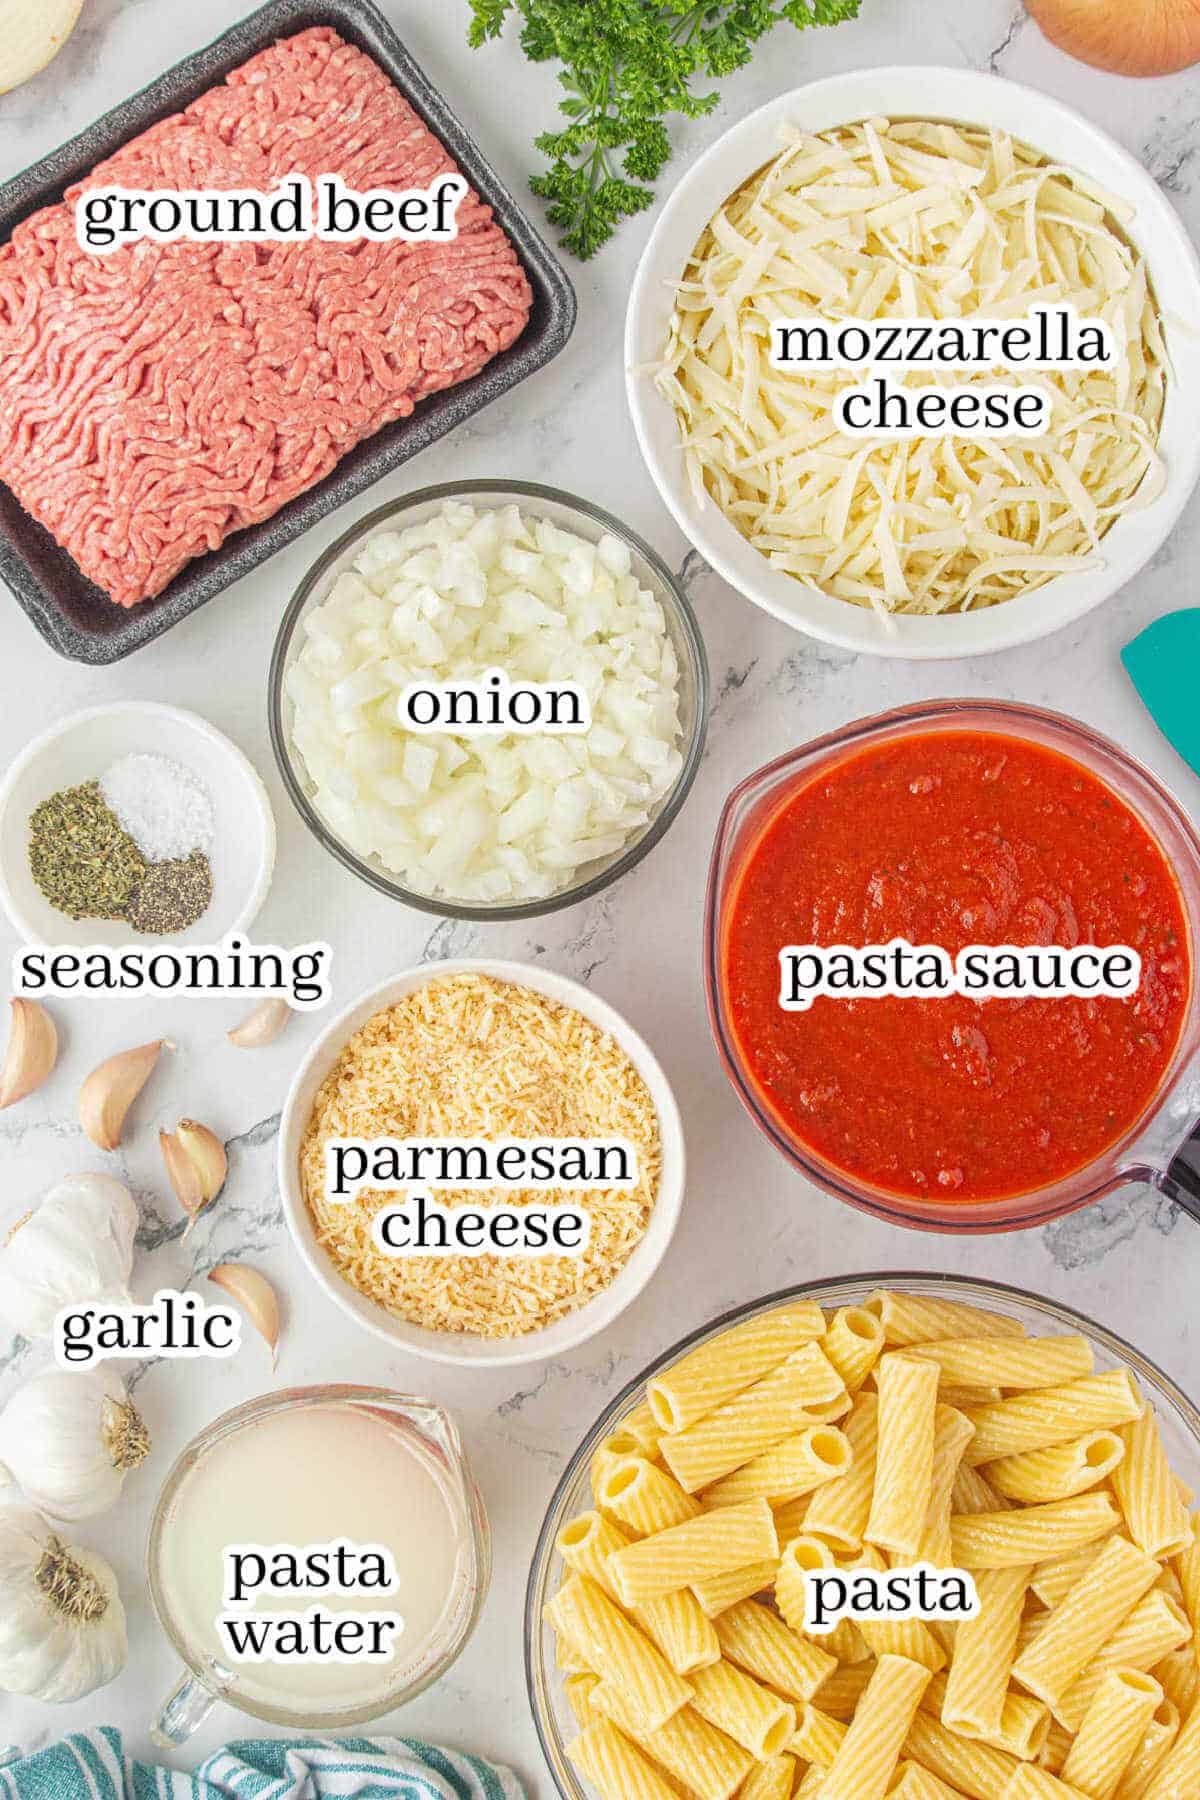 Ingredients for the pasta casserole, with print overlay for clarification.